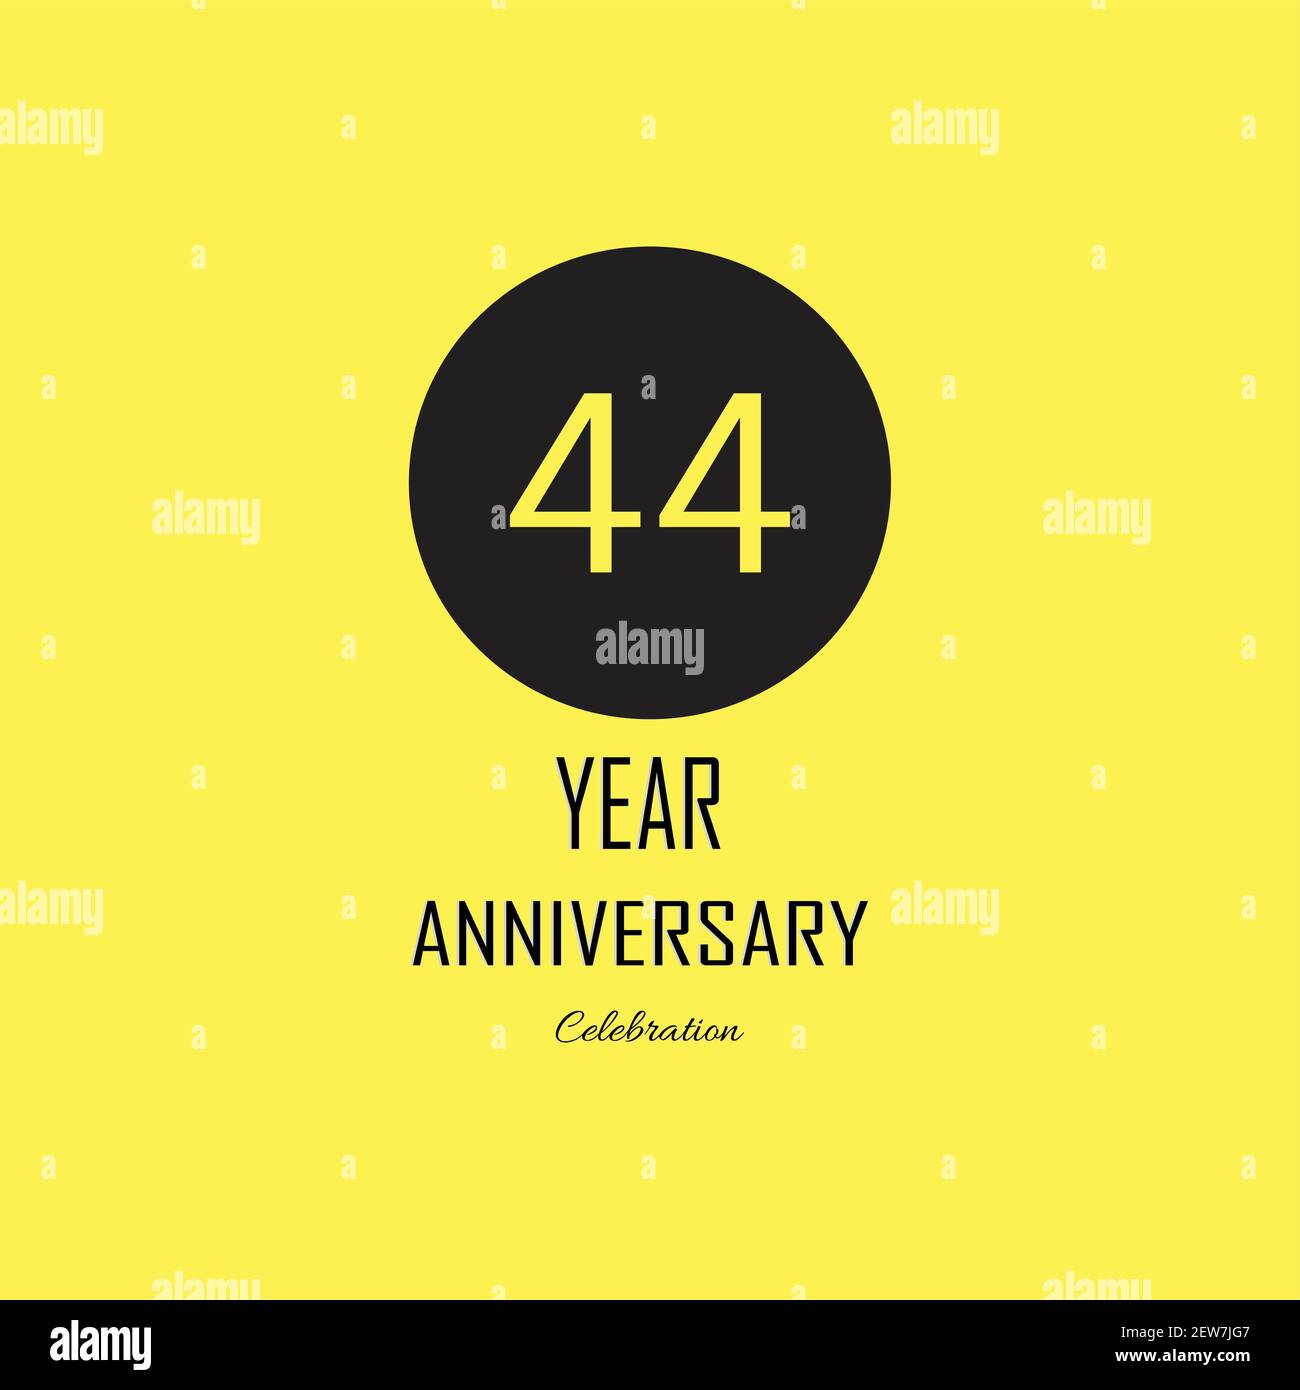 44 Anniversary celebration on yellow background. Vector festive illustration. Birthday or wedding party event decoration Stock Vector